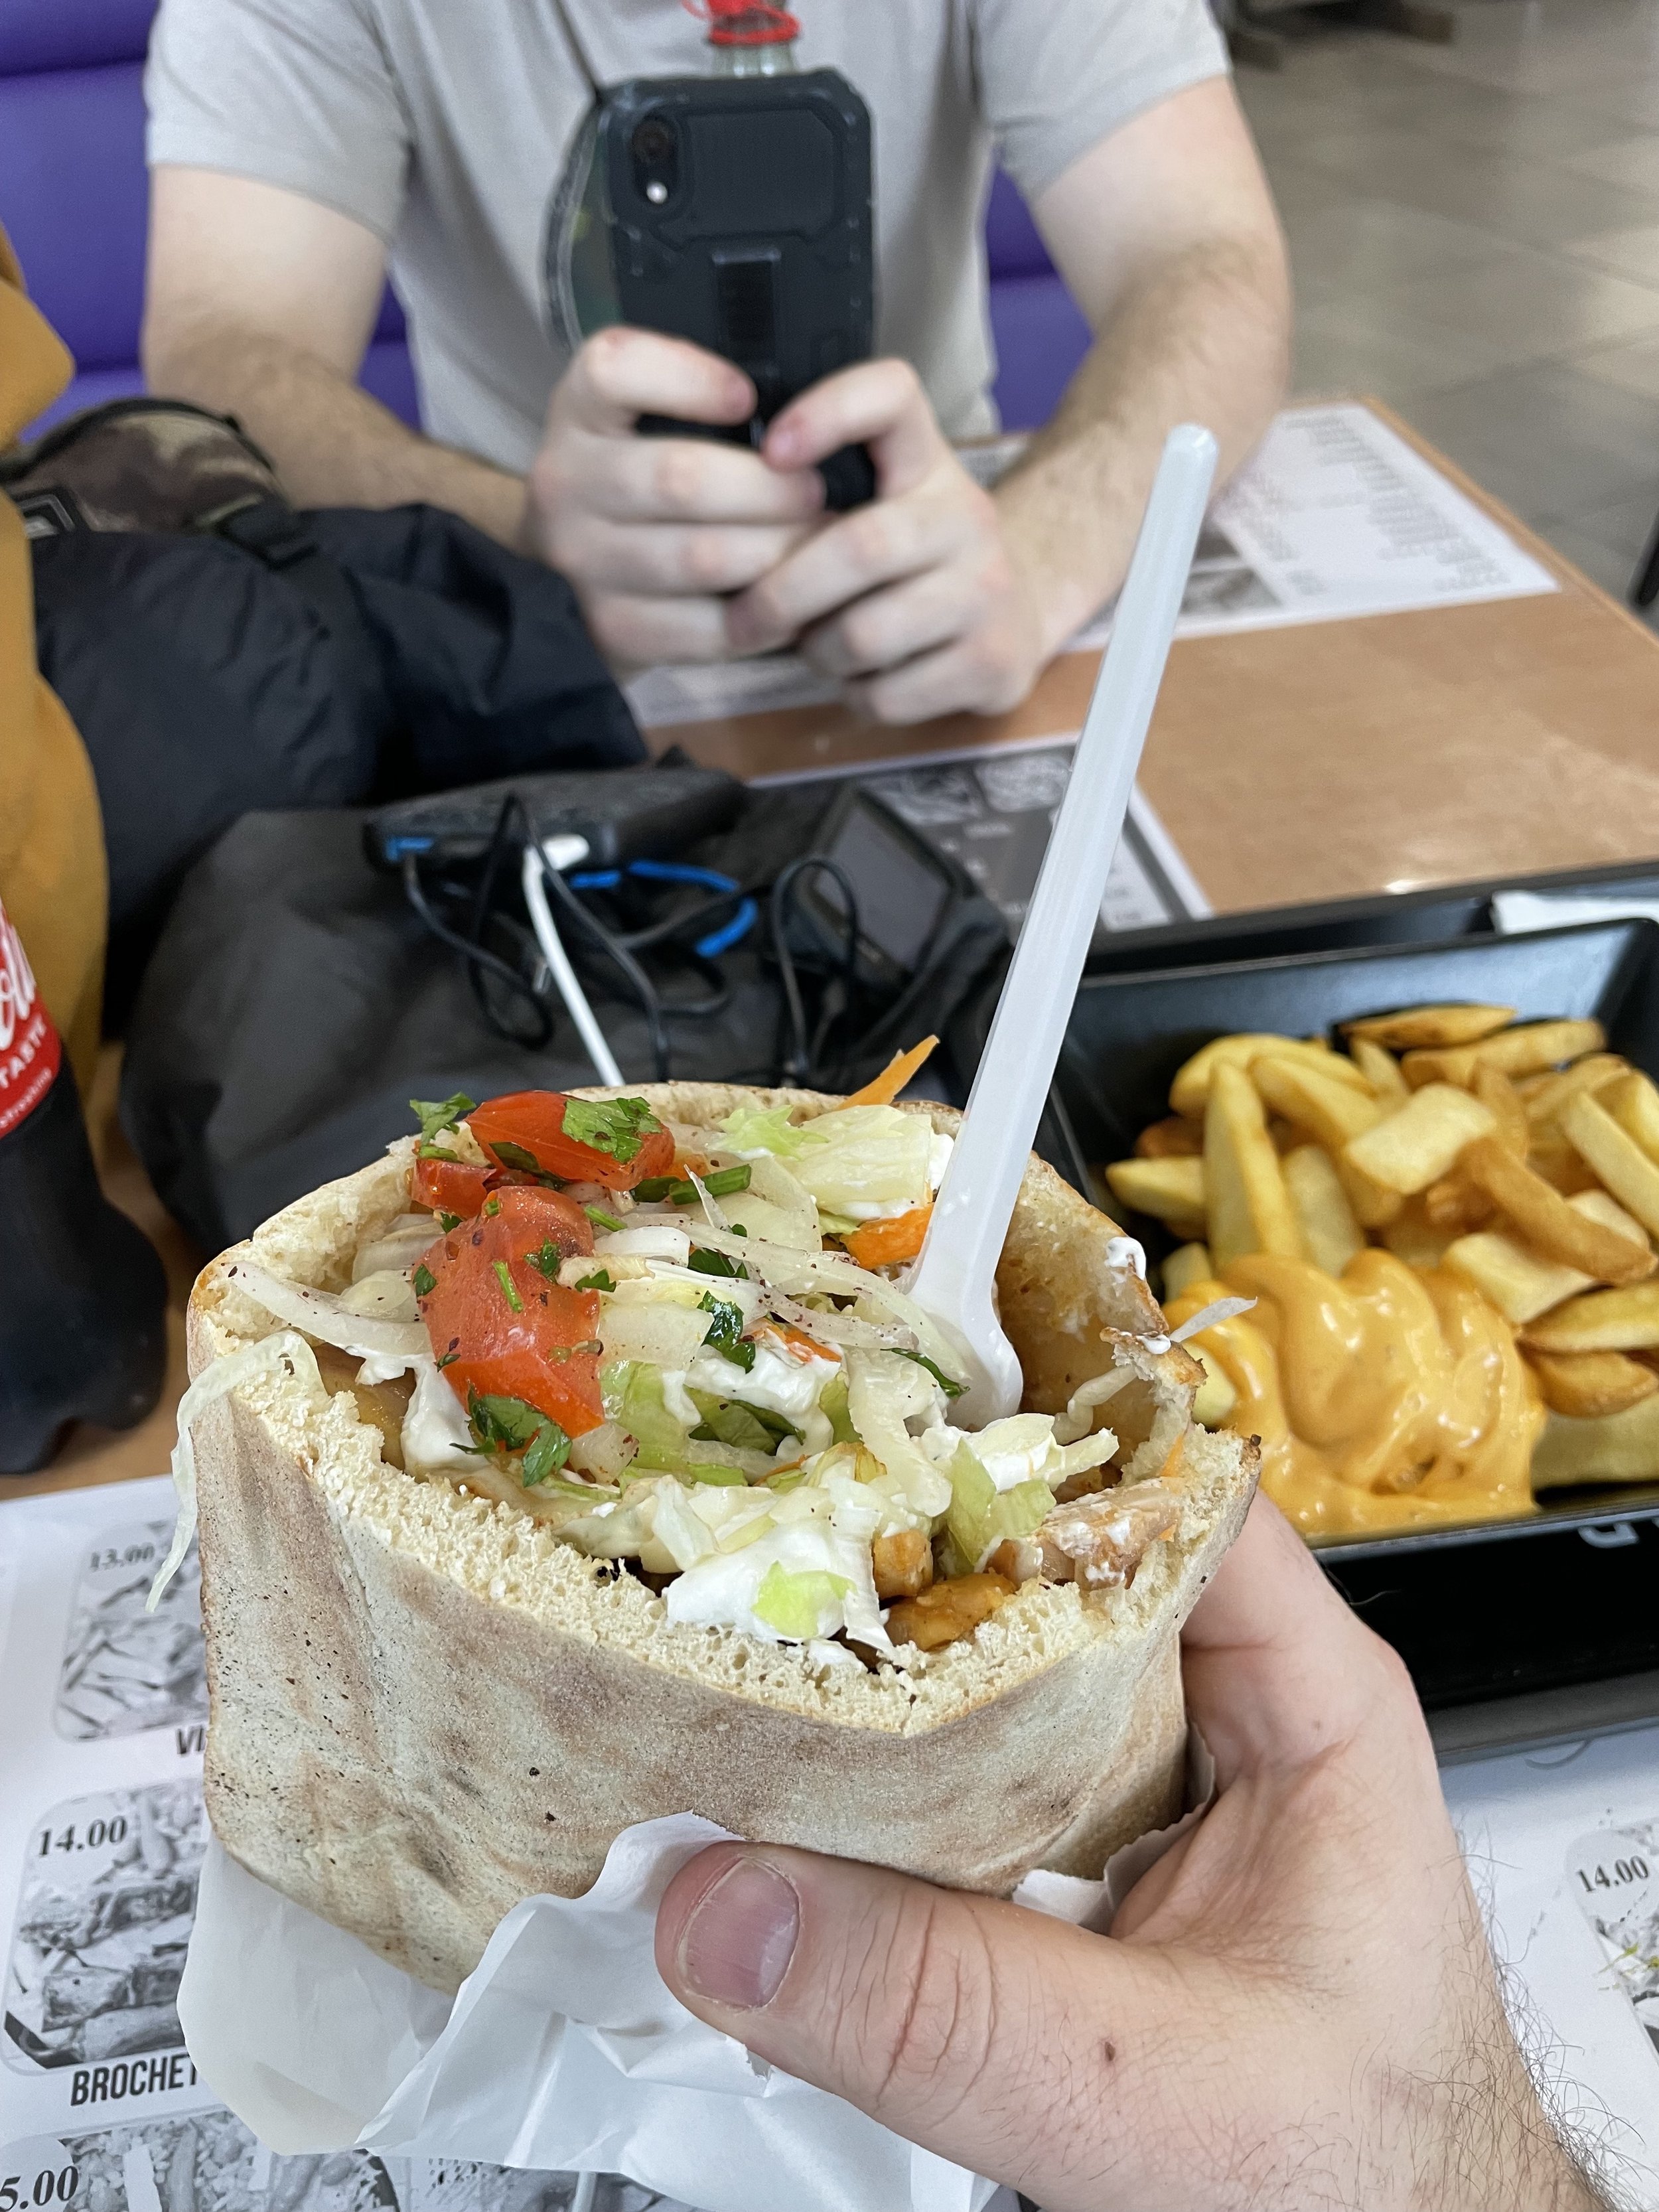  Some much needed calories from a Turkish Kabob Deli - Falafel FTW  